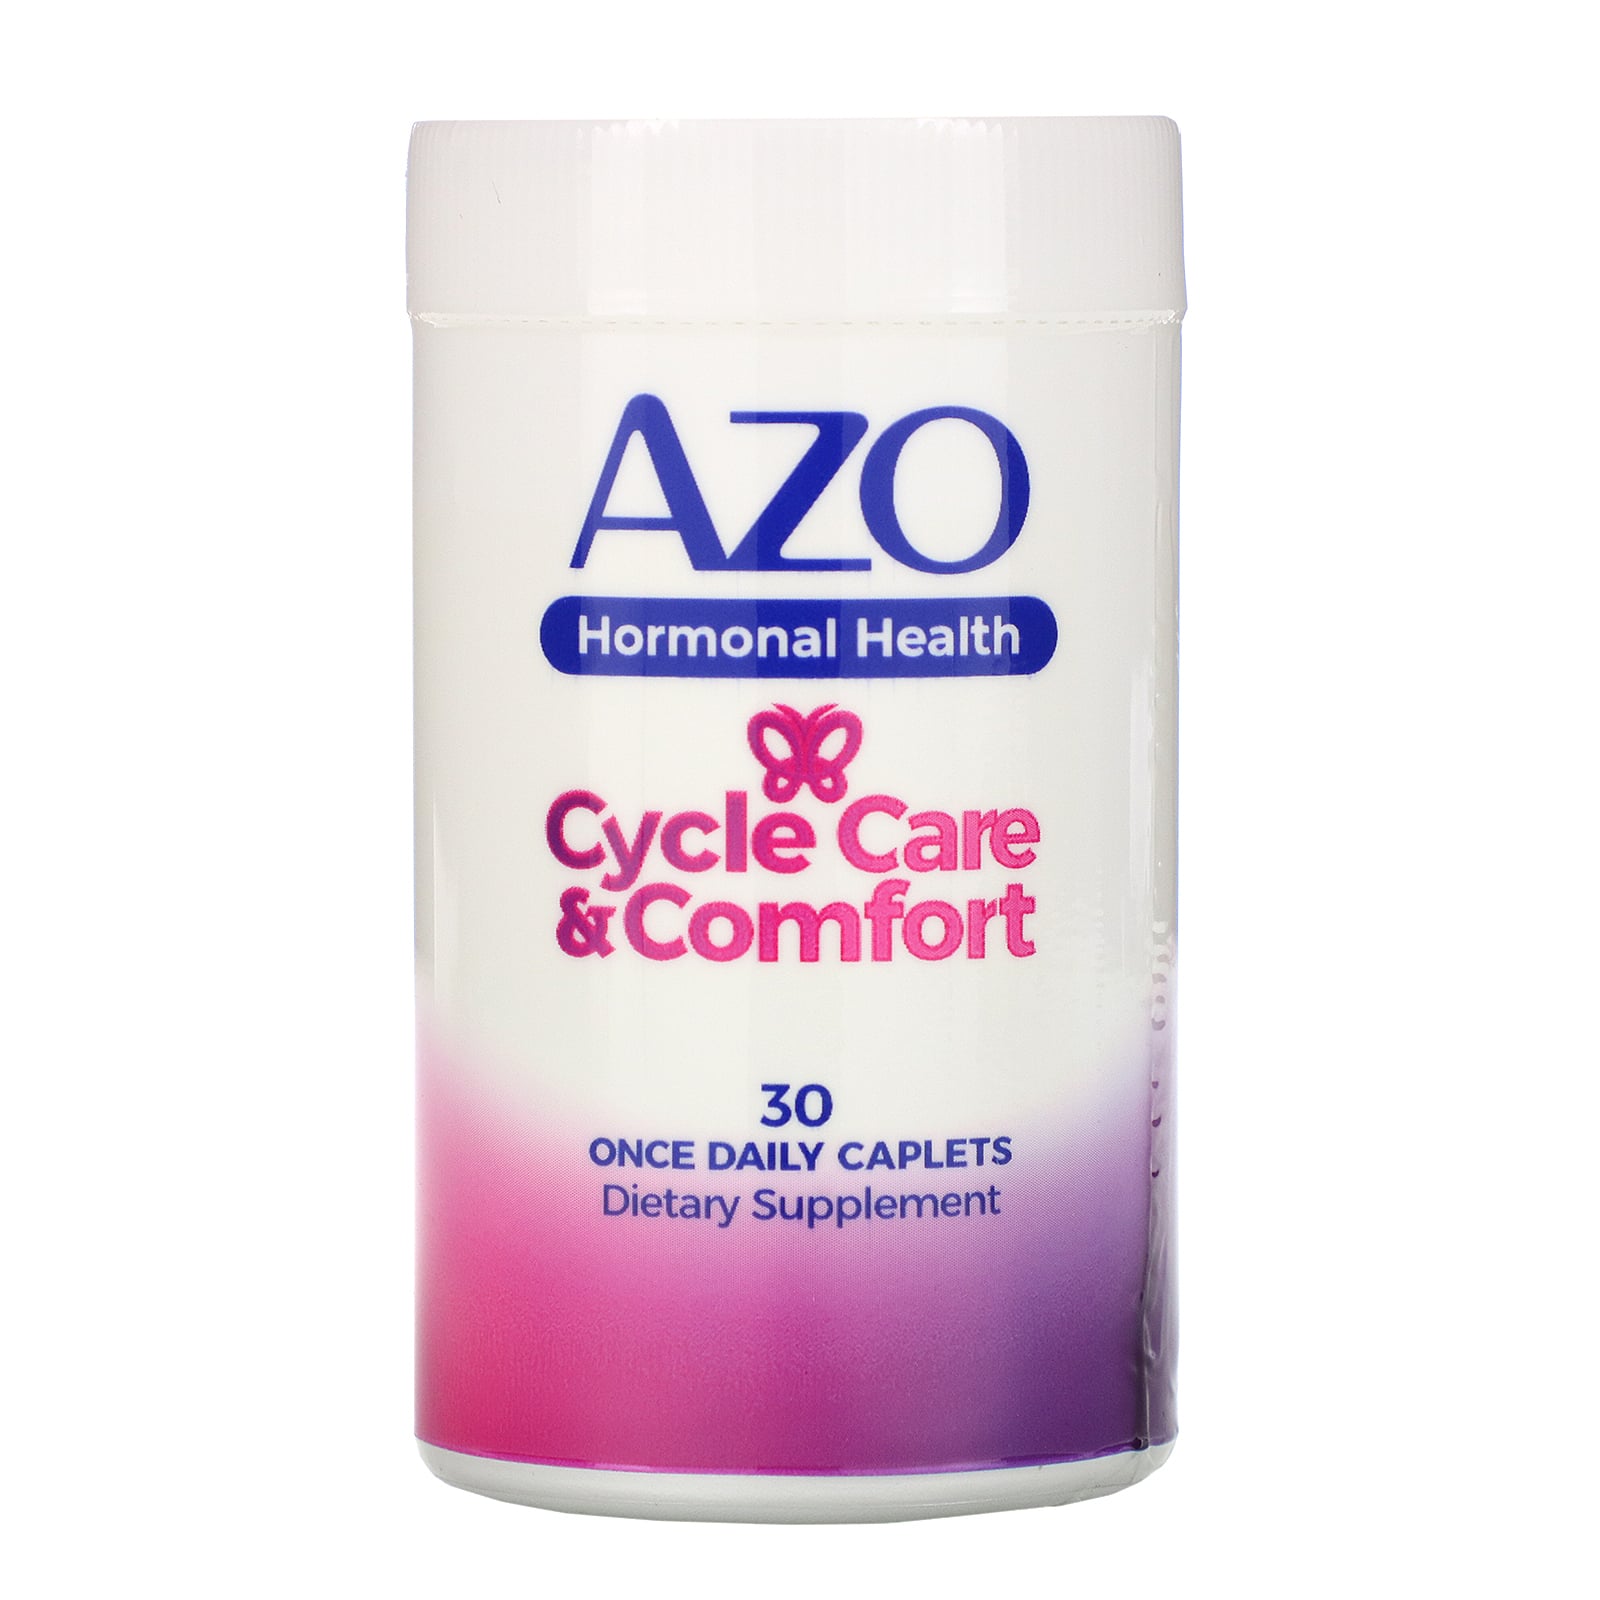 Azo, Hormonal Health, Cycle Care &  Comfort, 30 Once Daily Caplets